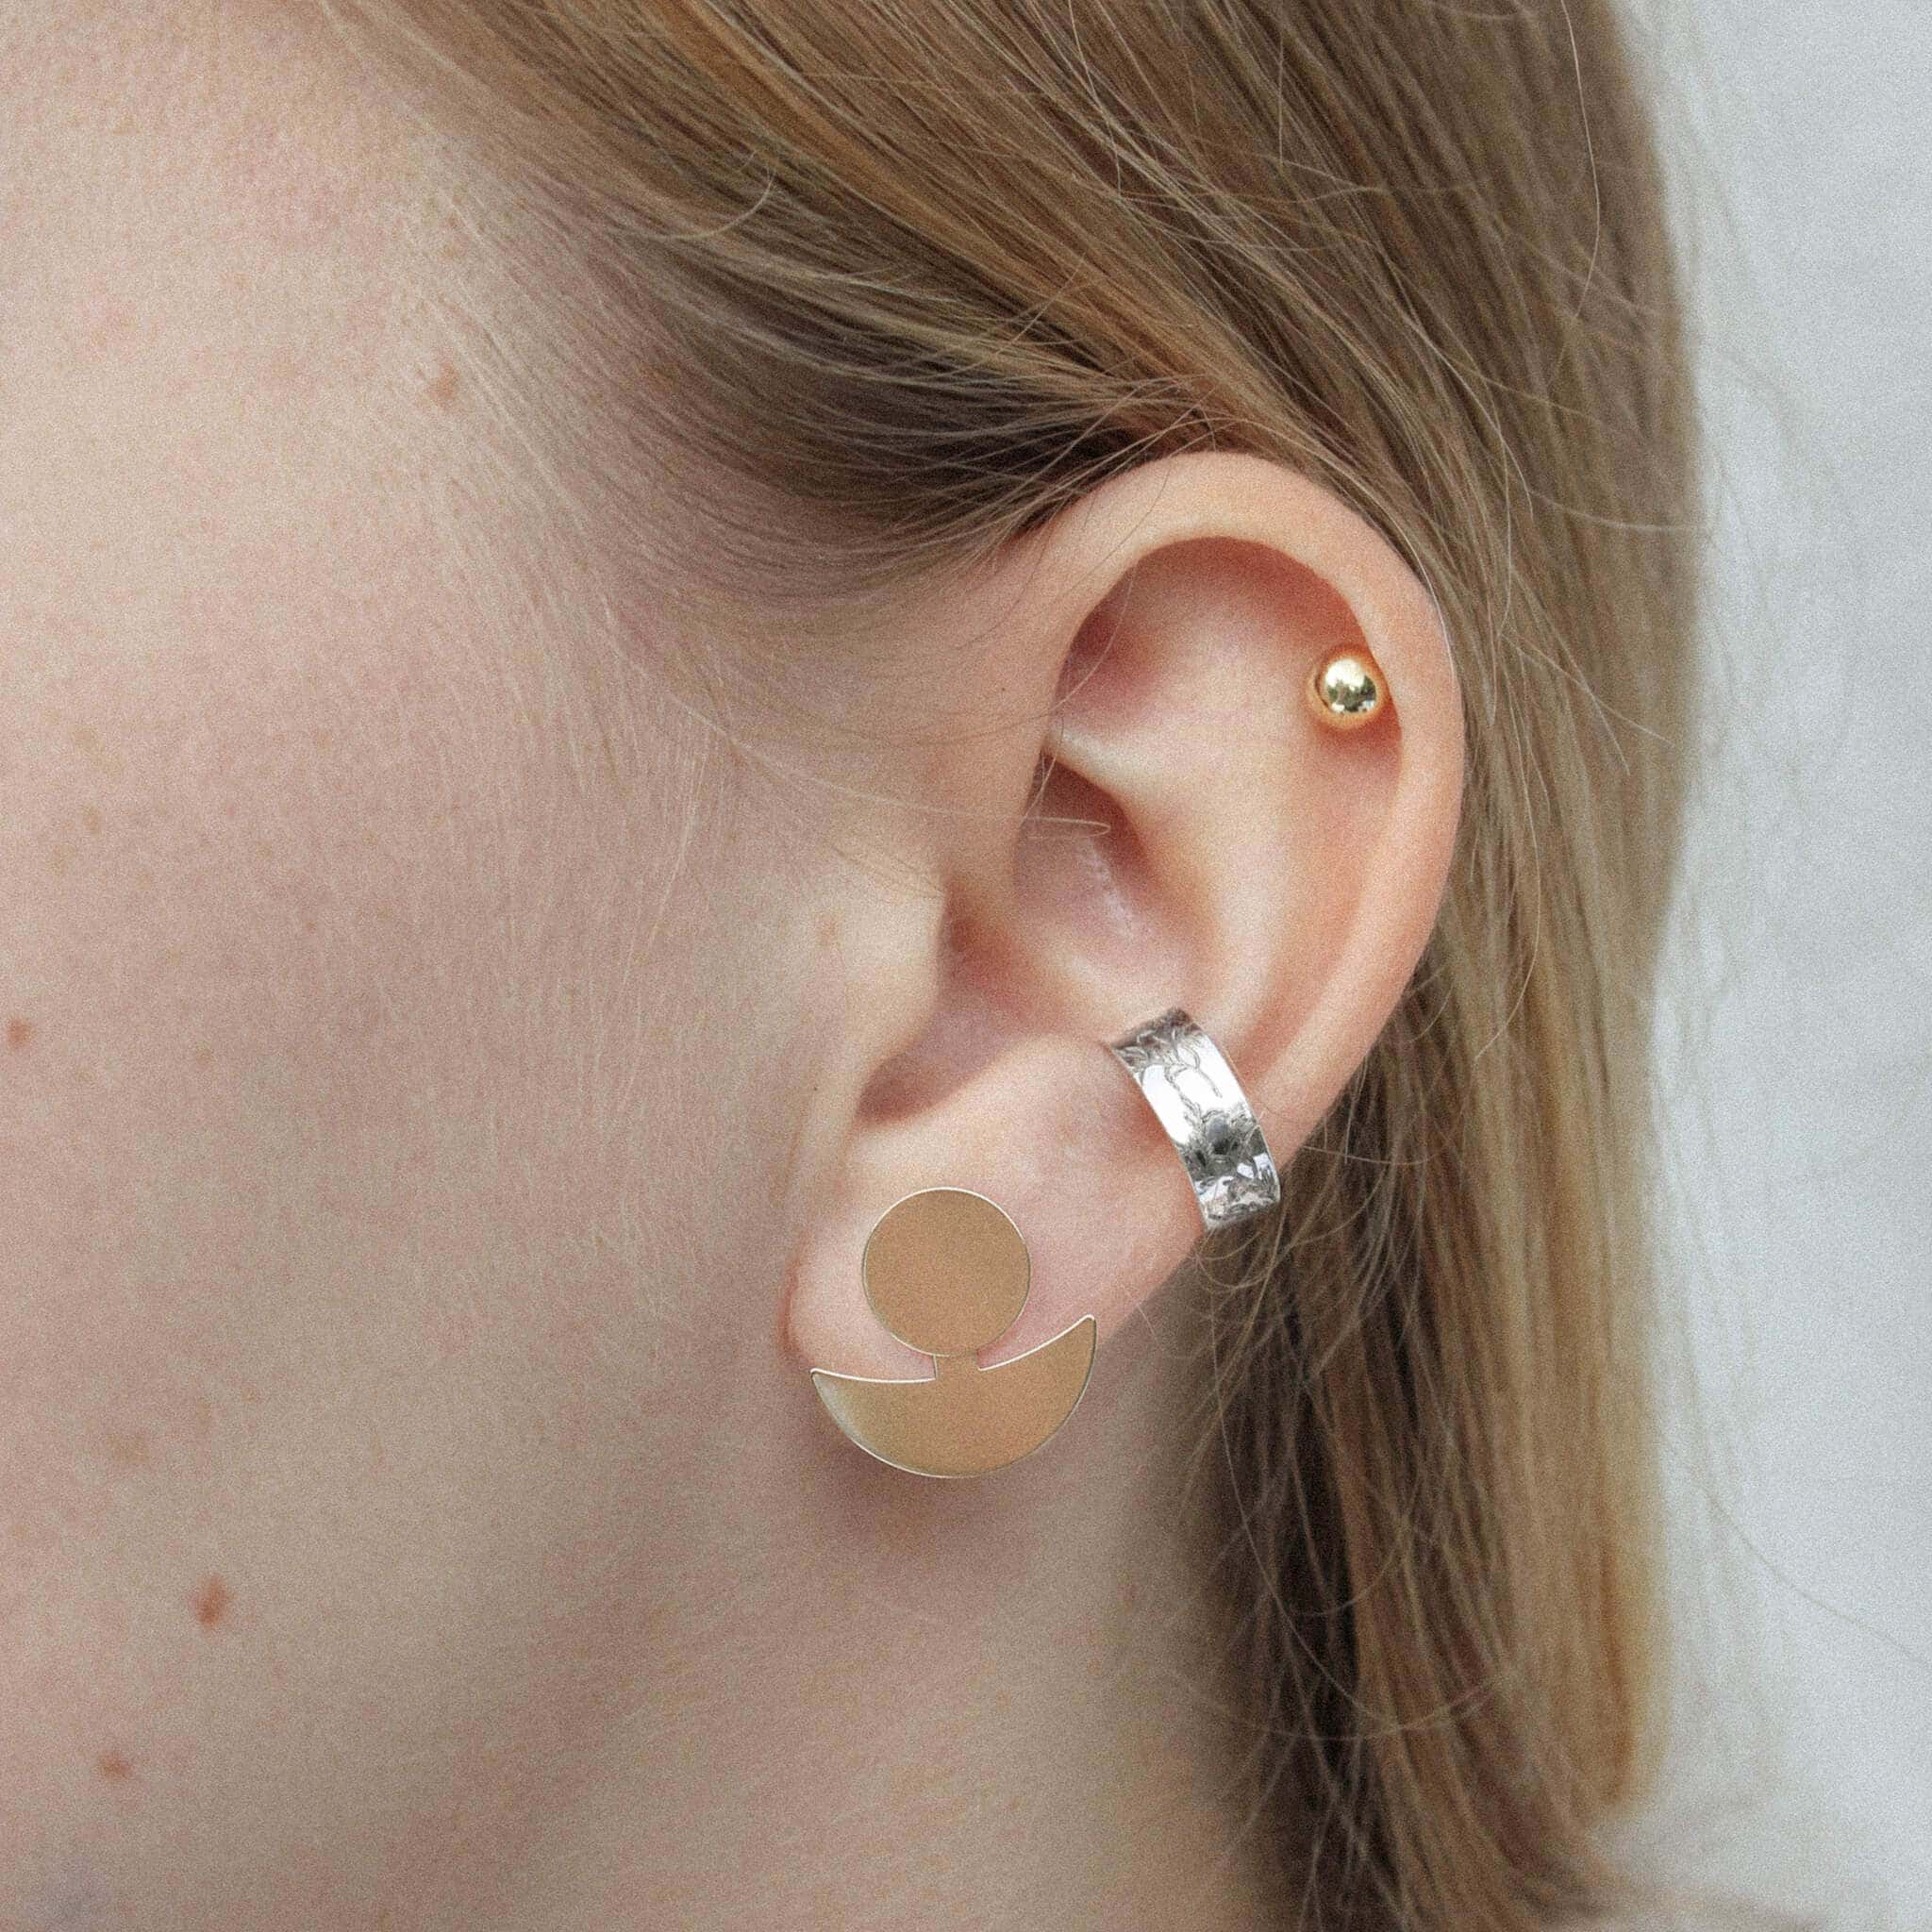 The model is wearing gold earrings in the form of the Moon and earcuff with floral motifs.